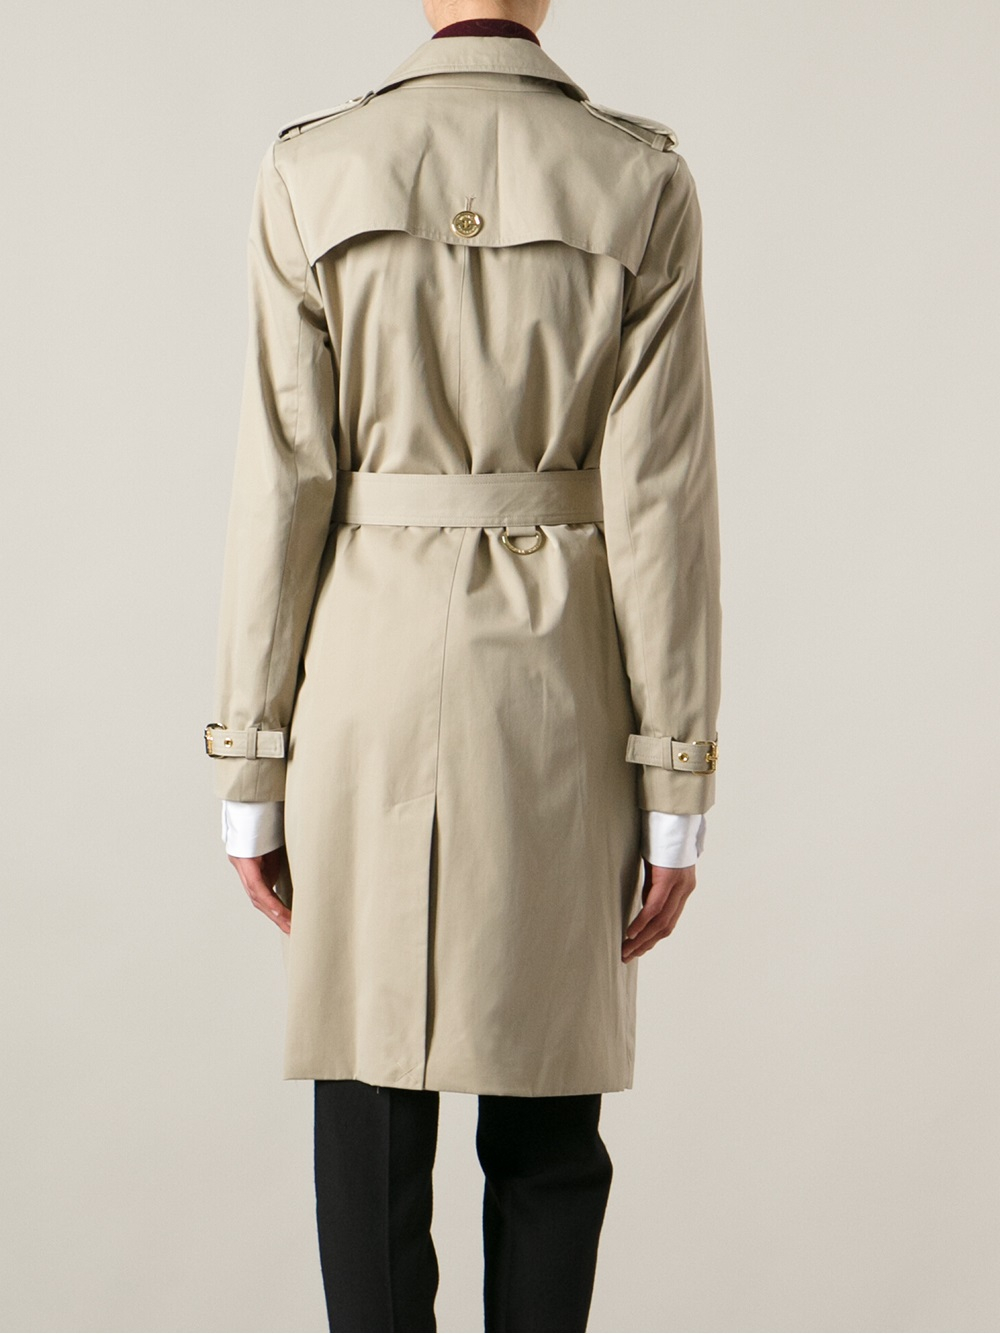 MICHAEL Kors Double Breasted Coat in Natural | Lyst